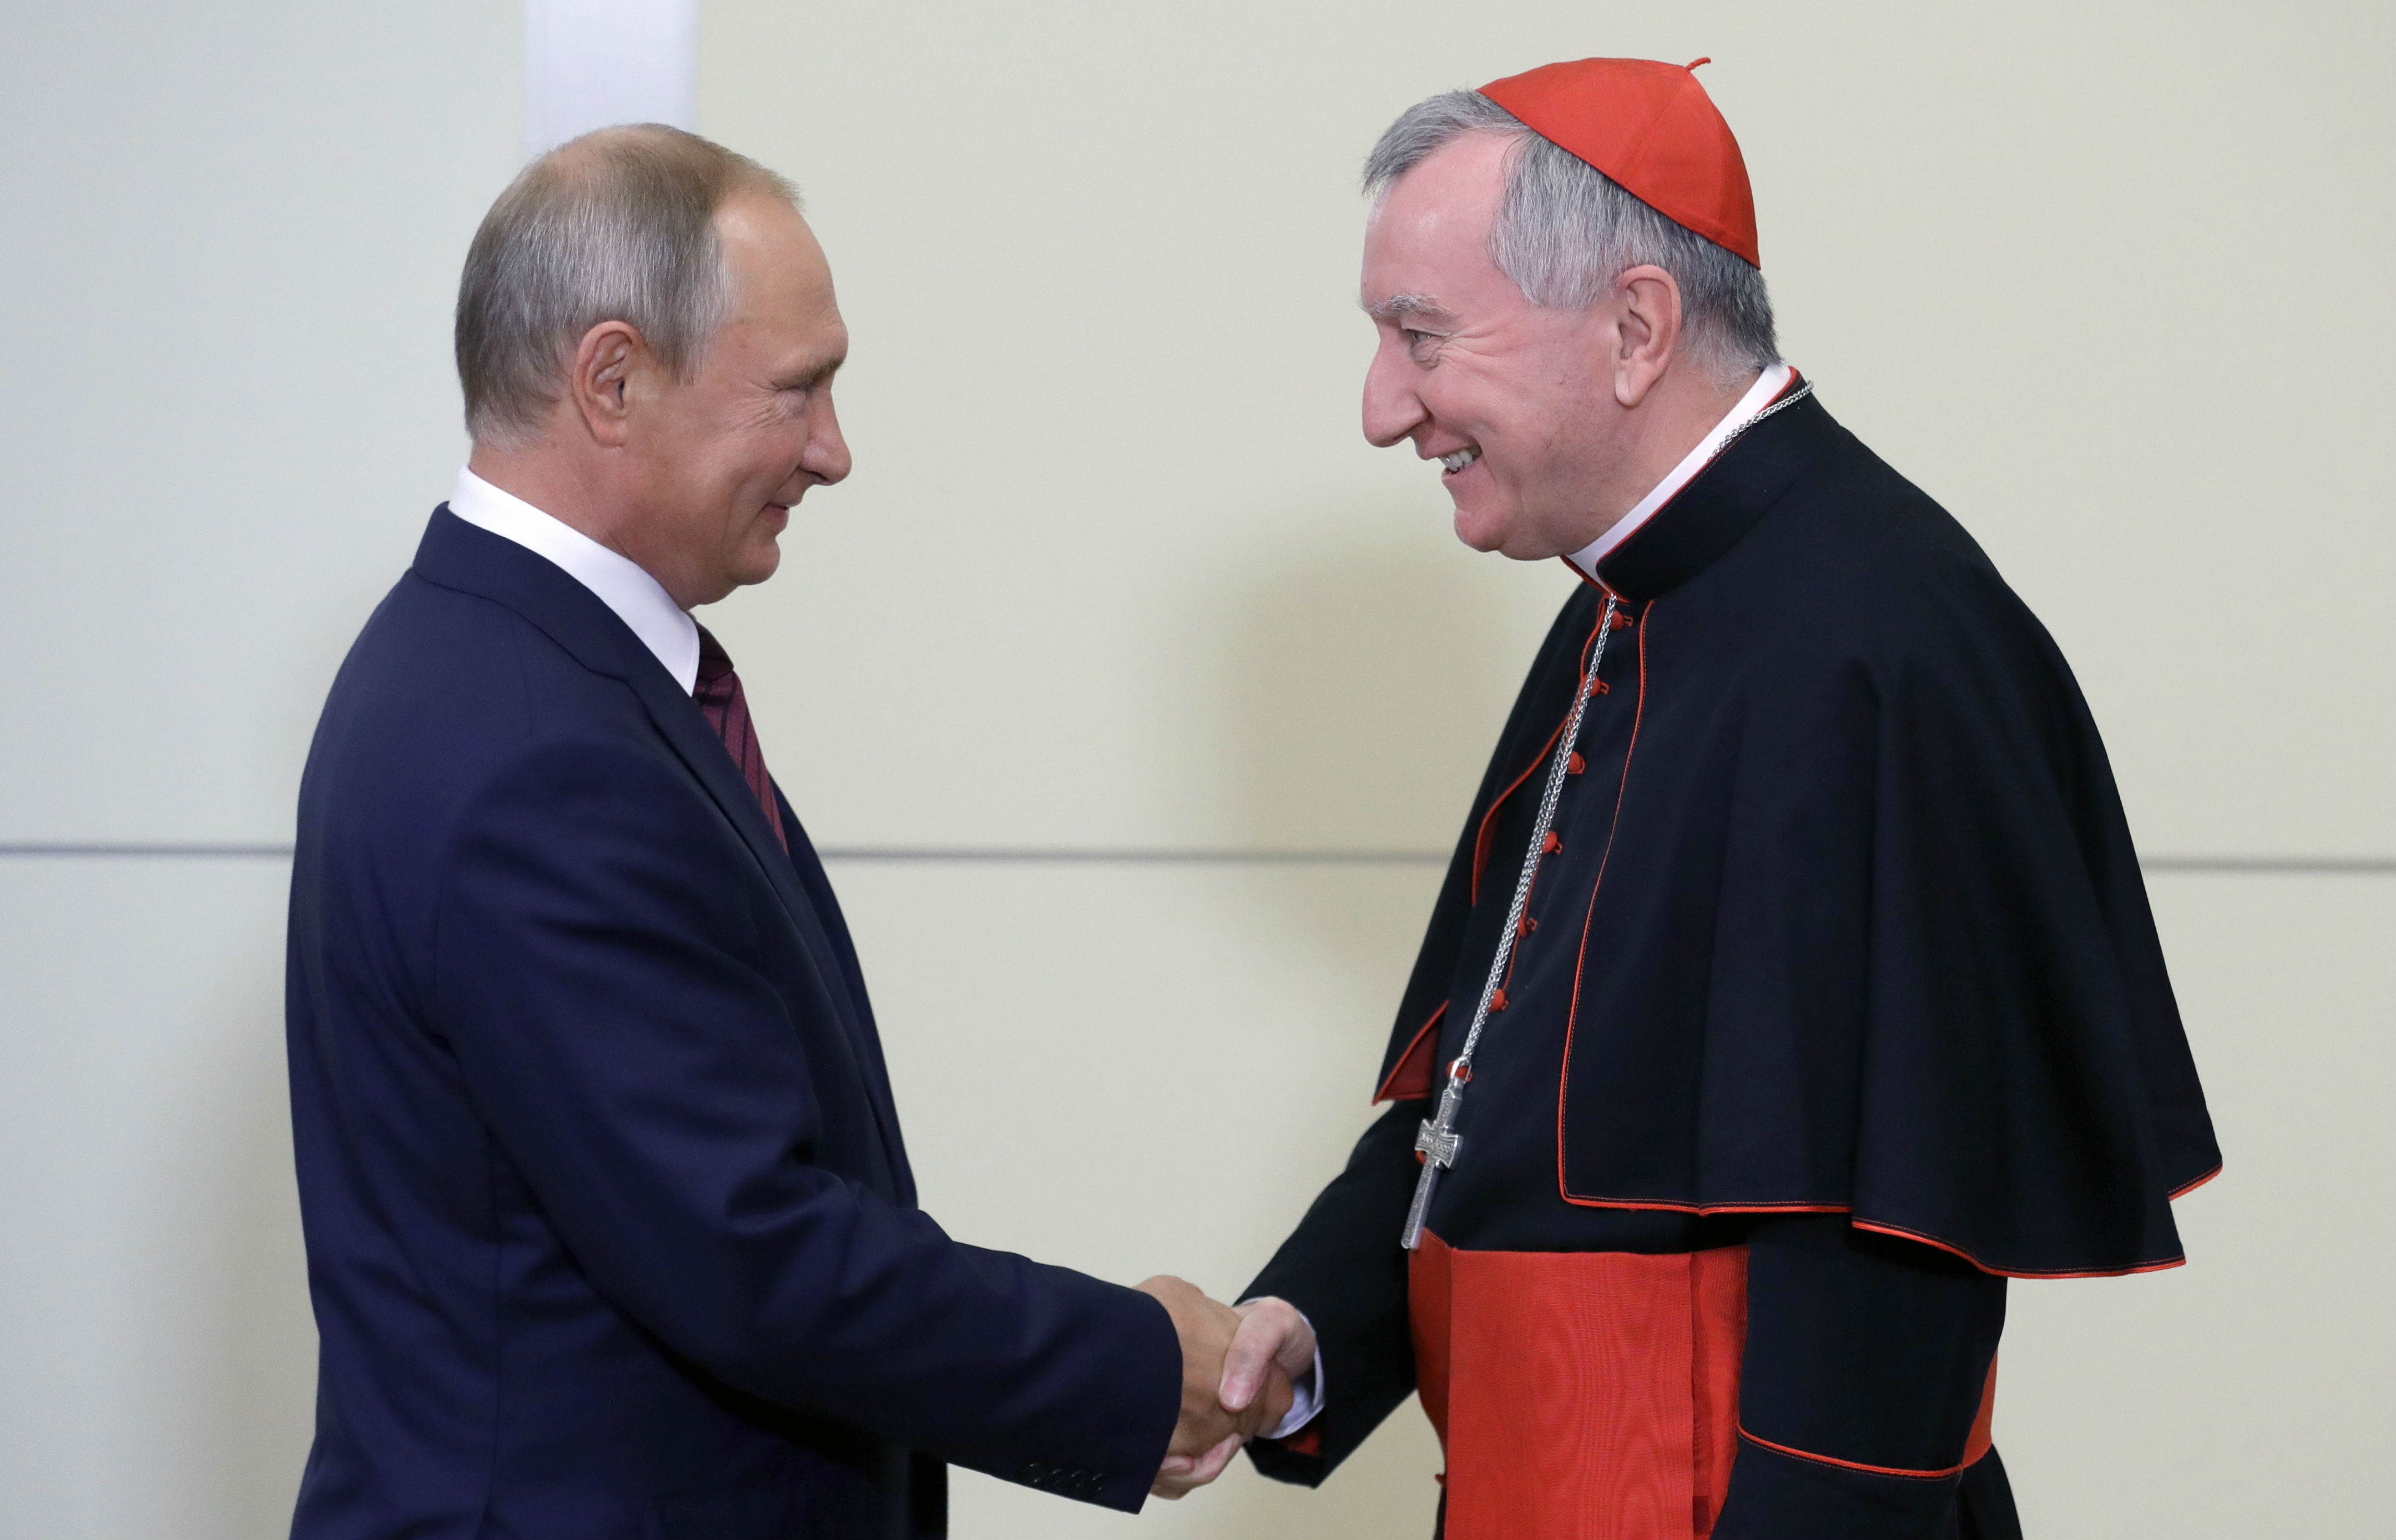 'Trusting and constructive dialogue' between Russia and the Vatican, says President Putin 